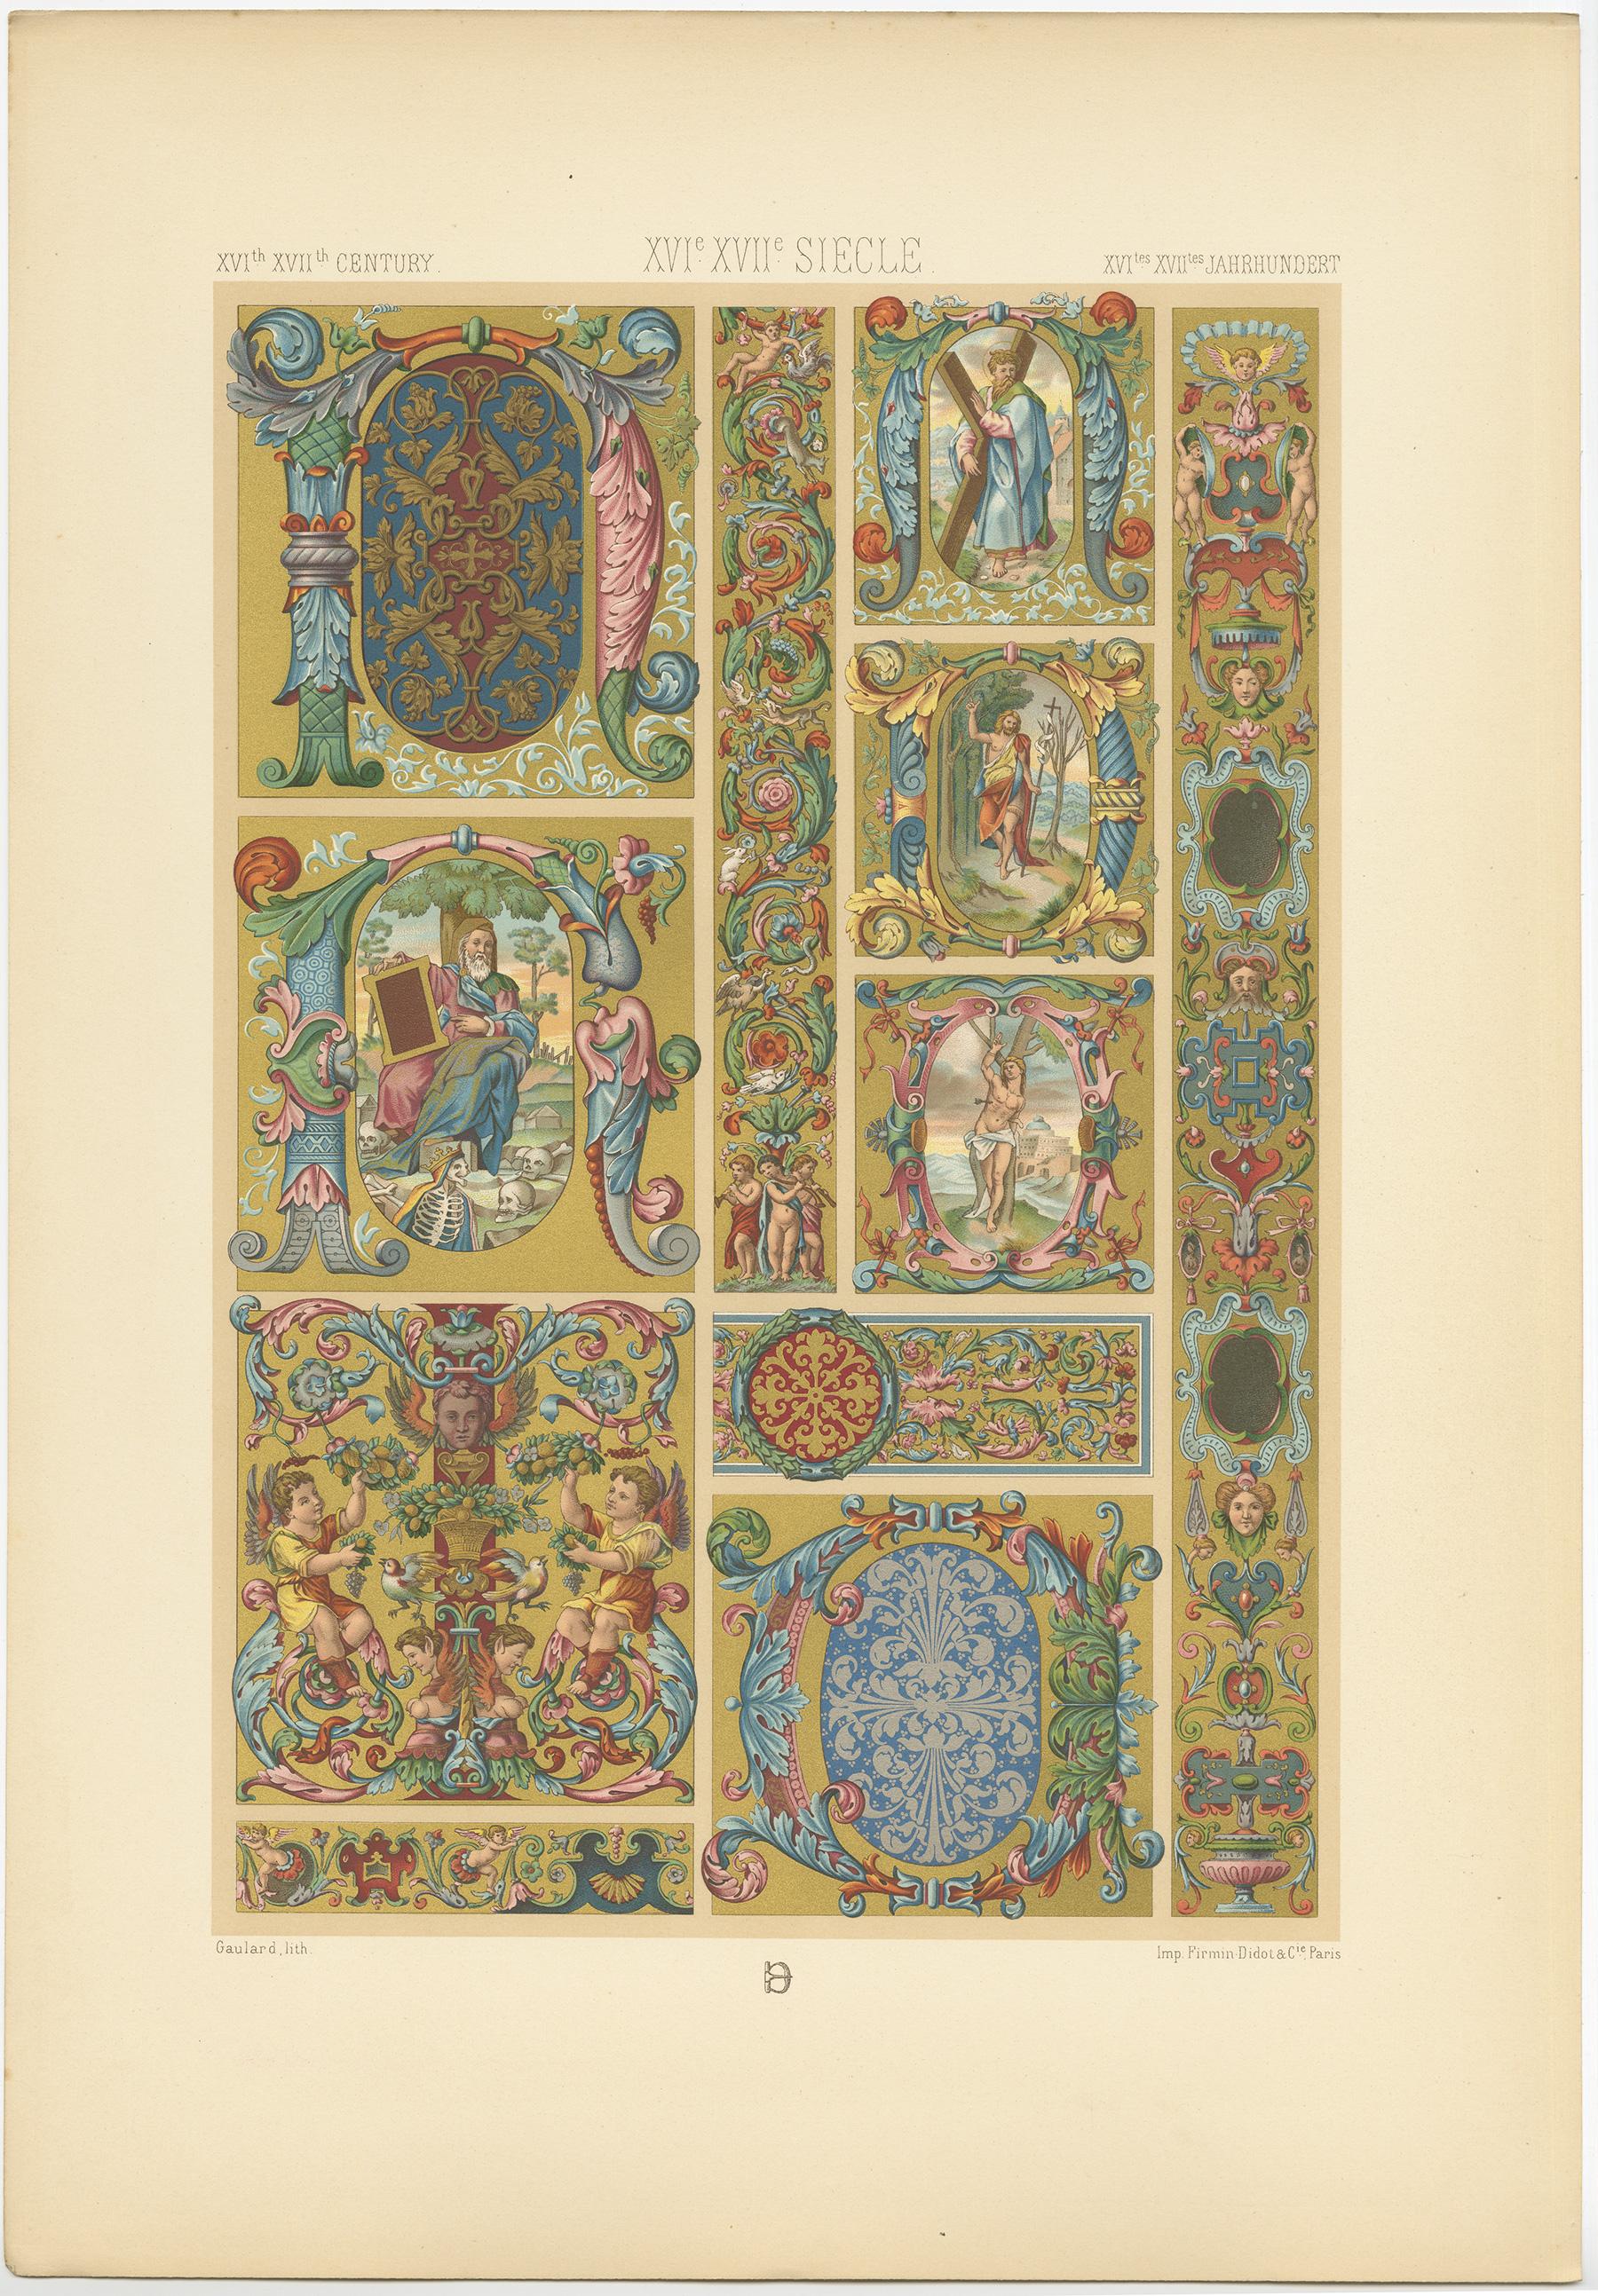 Antique print titled '16th-17th Century - XVIc-XVIIc Siècle - XVIles-XVIIles Jahrhundert'. Chromolithograph of Italian manuscripts decorations, second half of the 16th century ornaments. This print originates from 'l'Ornement Polychrome' by Auguste